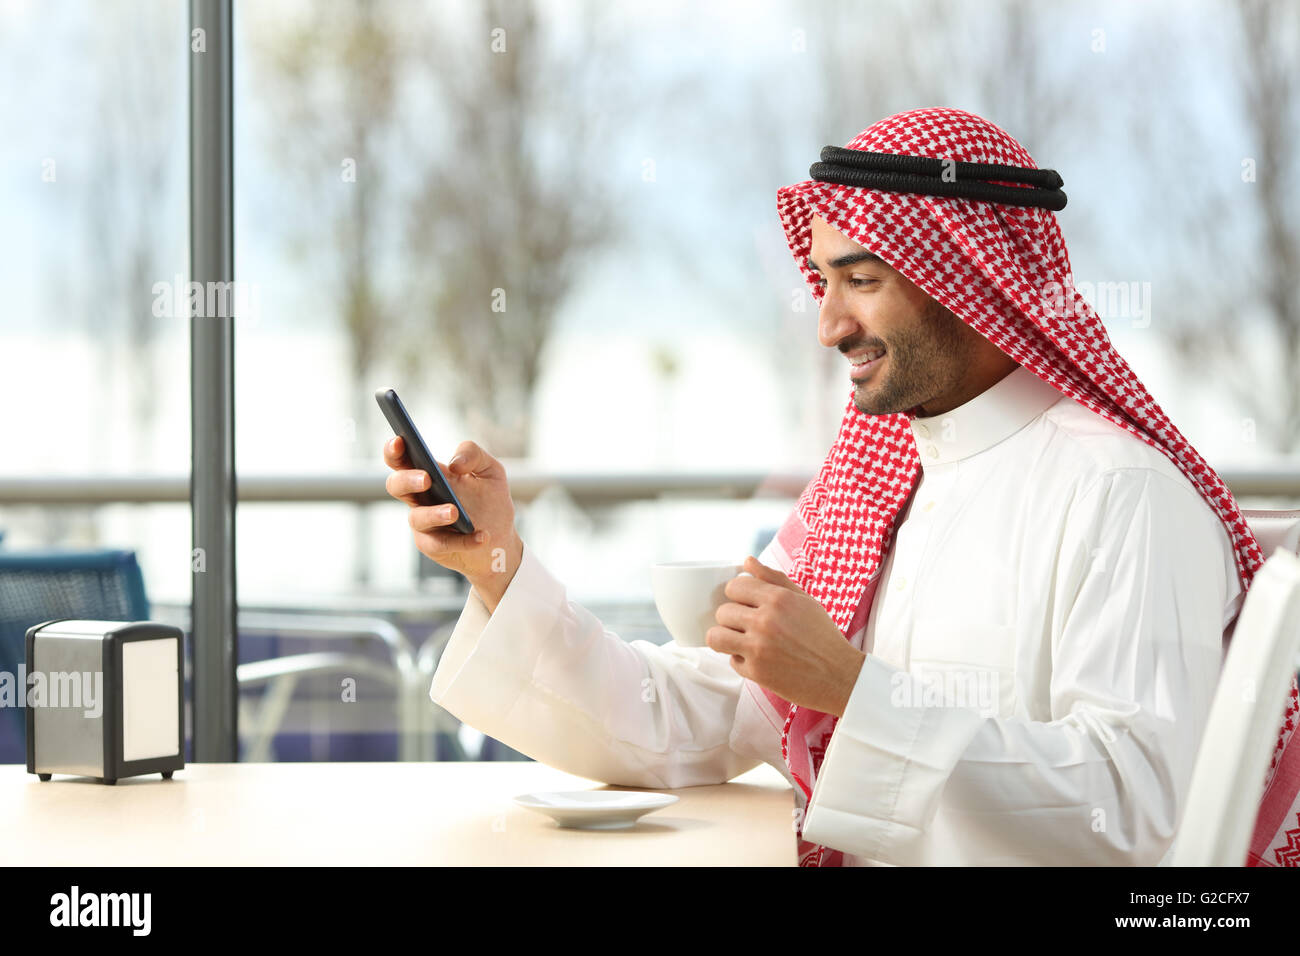 Side view of an arab man texting in a smart phone in a coffee shop with a window with a sunny day in the background Stock Photo